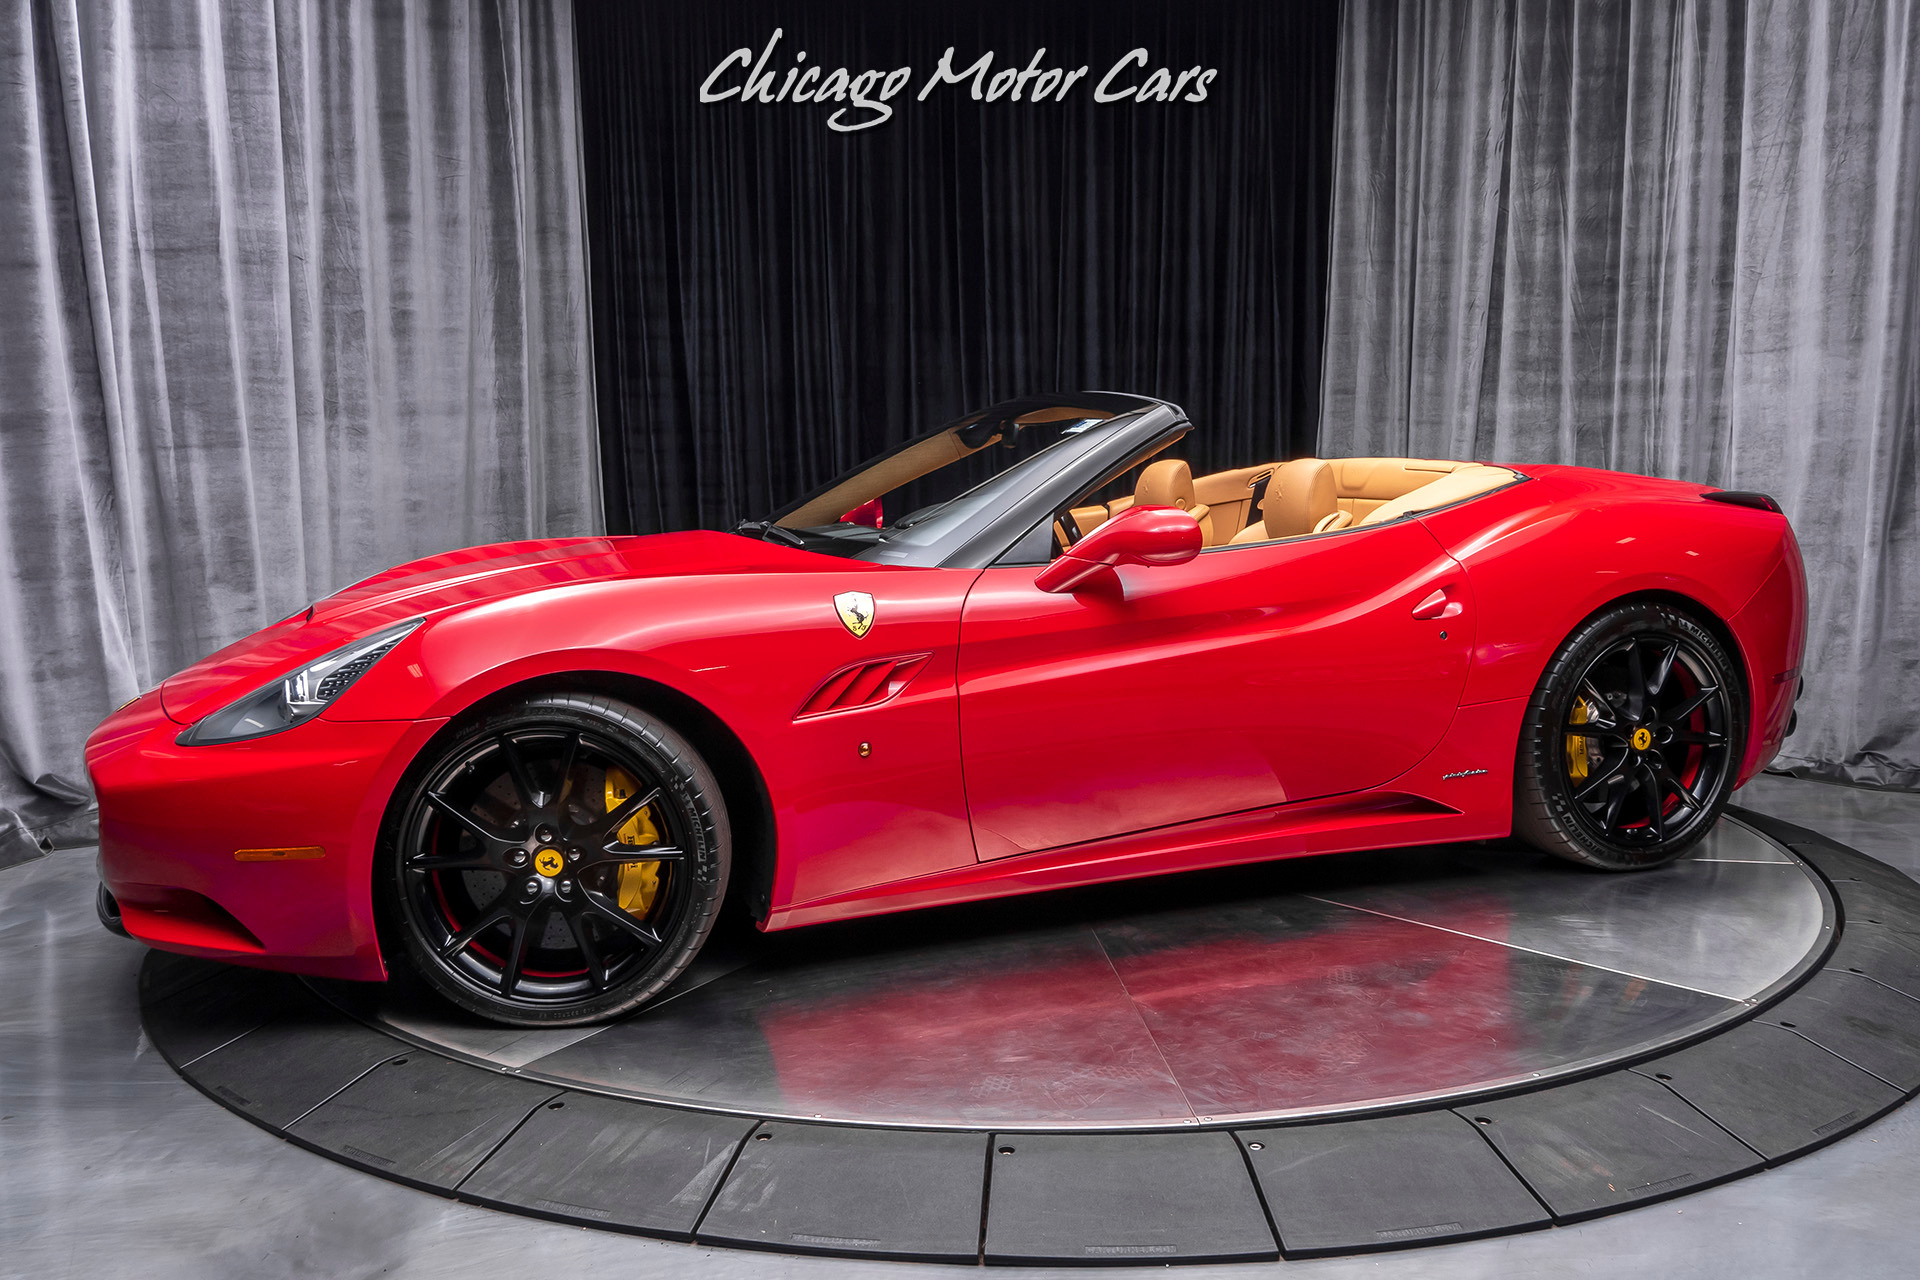 Used 2011 Ferrari California Convertible CARBON FIBER DRIVING ZONE + LEDS!  For Sale (Special Pricing) | Chicago Motor Cars Stock #16128